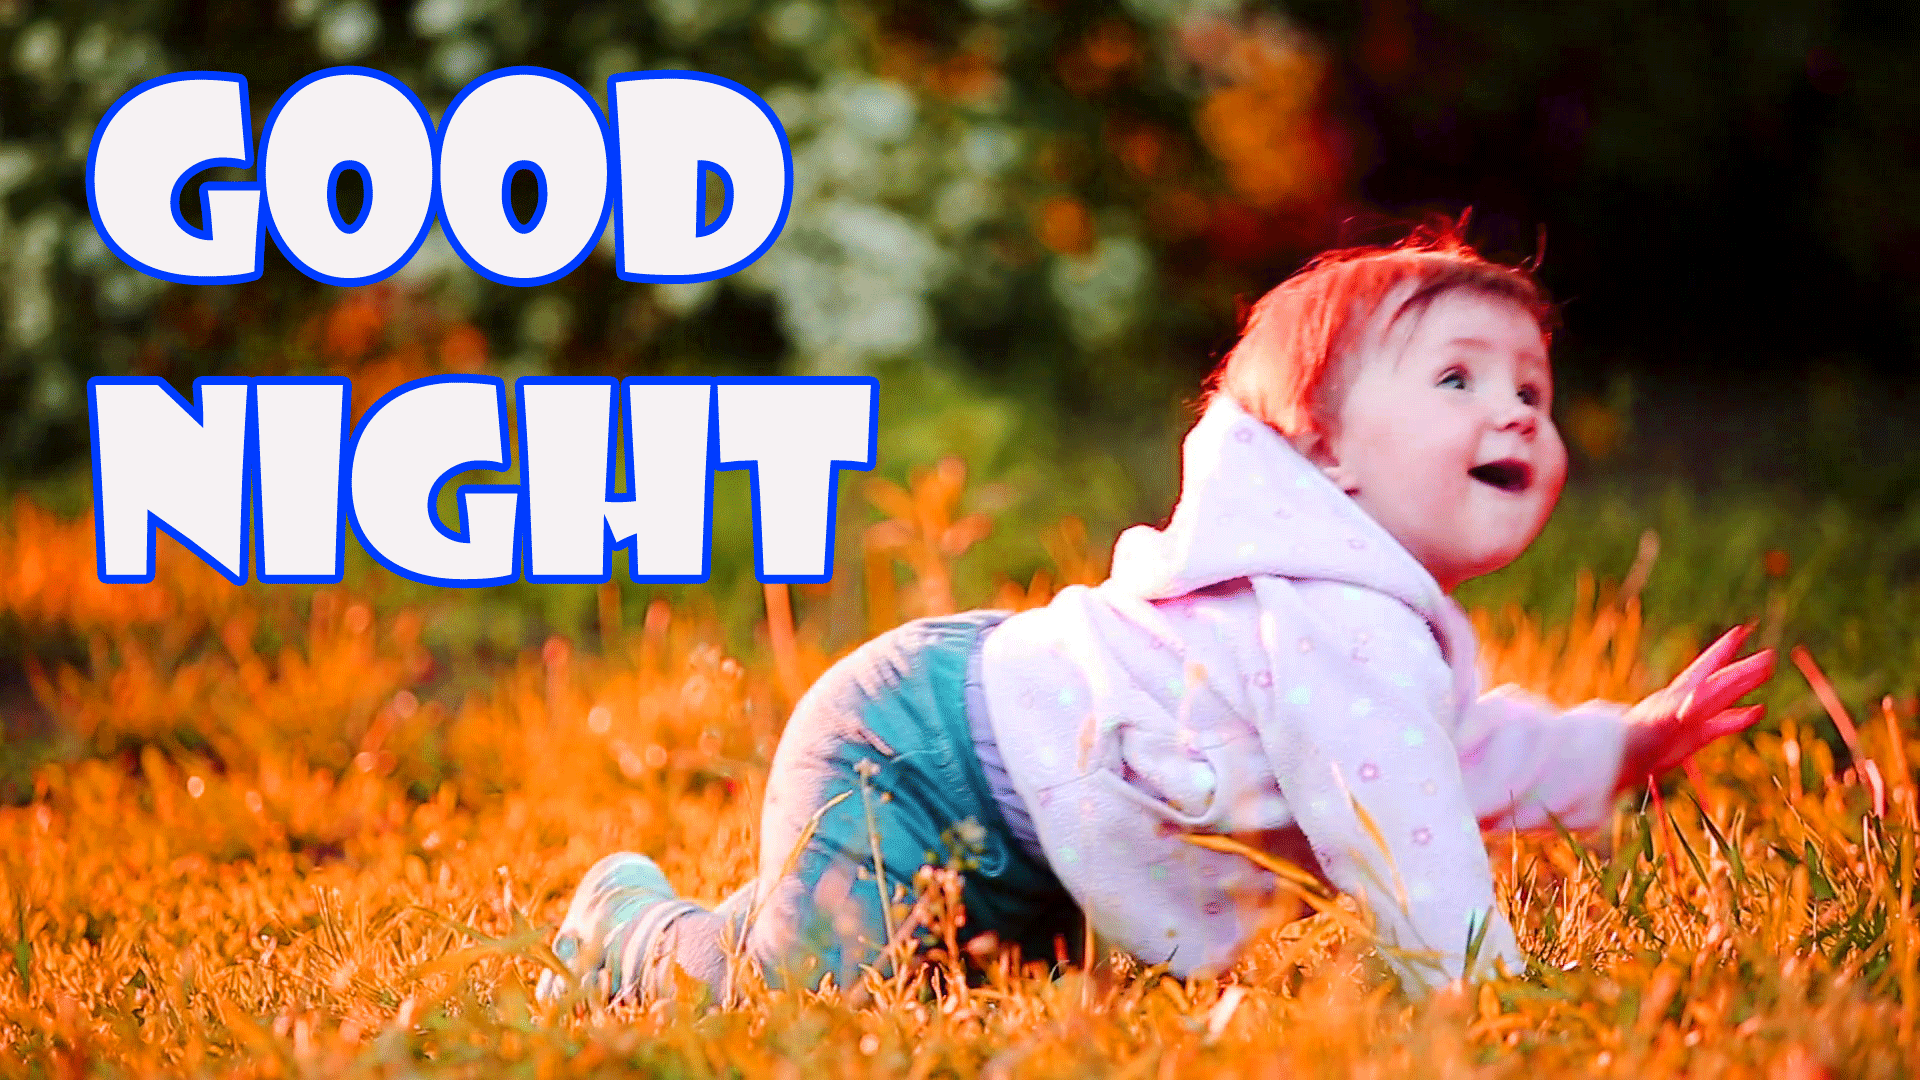 Cute Baby Good Night Wallpaper Pictures Pics Photo - Toddler , HD Wallpaper & Backgrounds